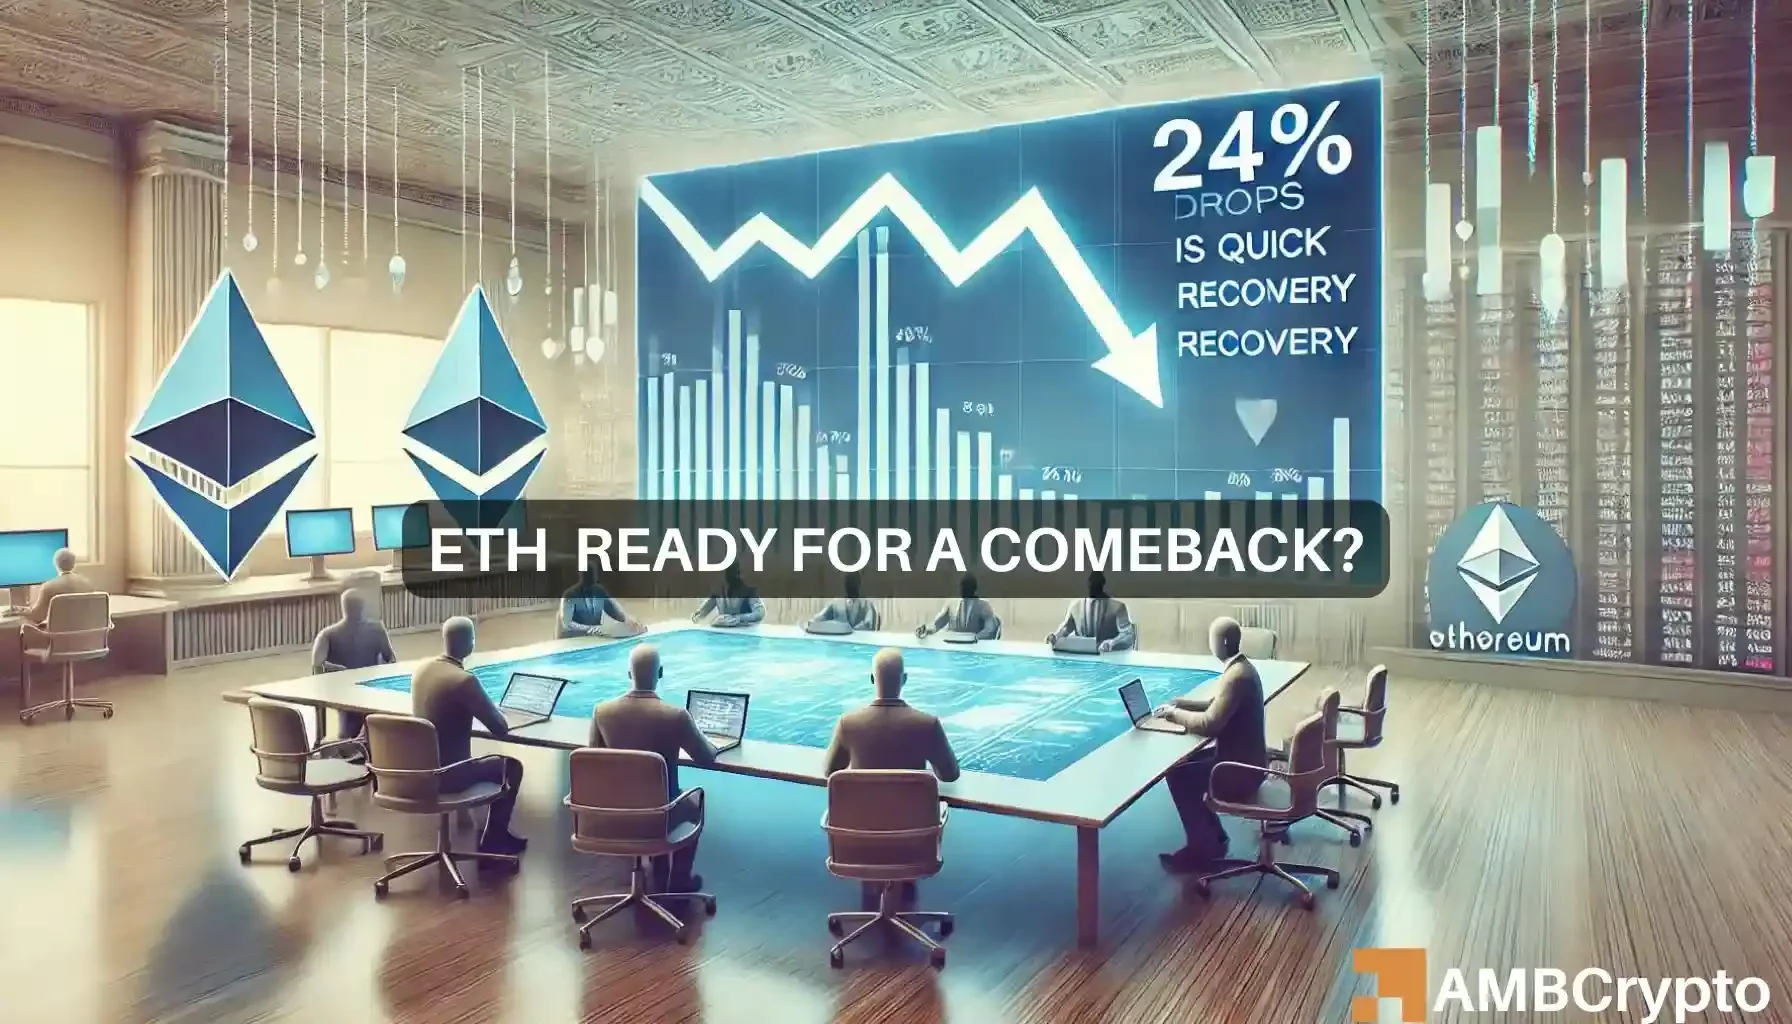 Ethereum: After a 24% crash in 7 days, how soon will ETH rebound?